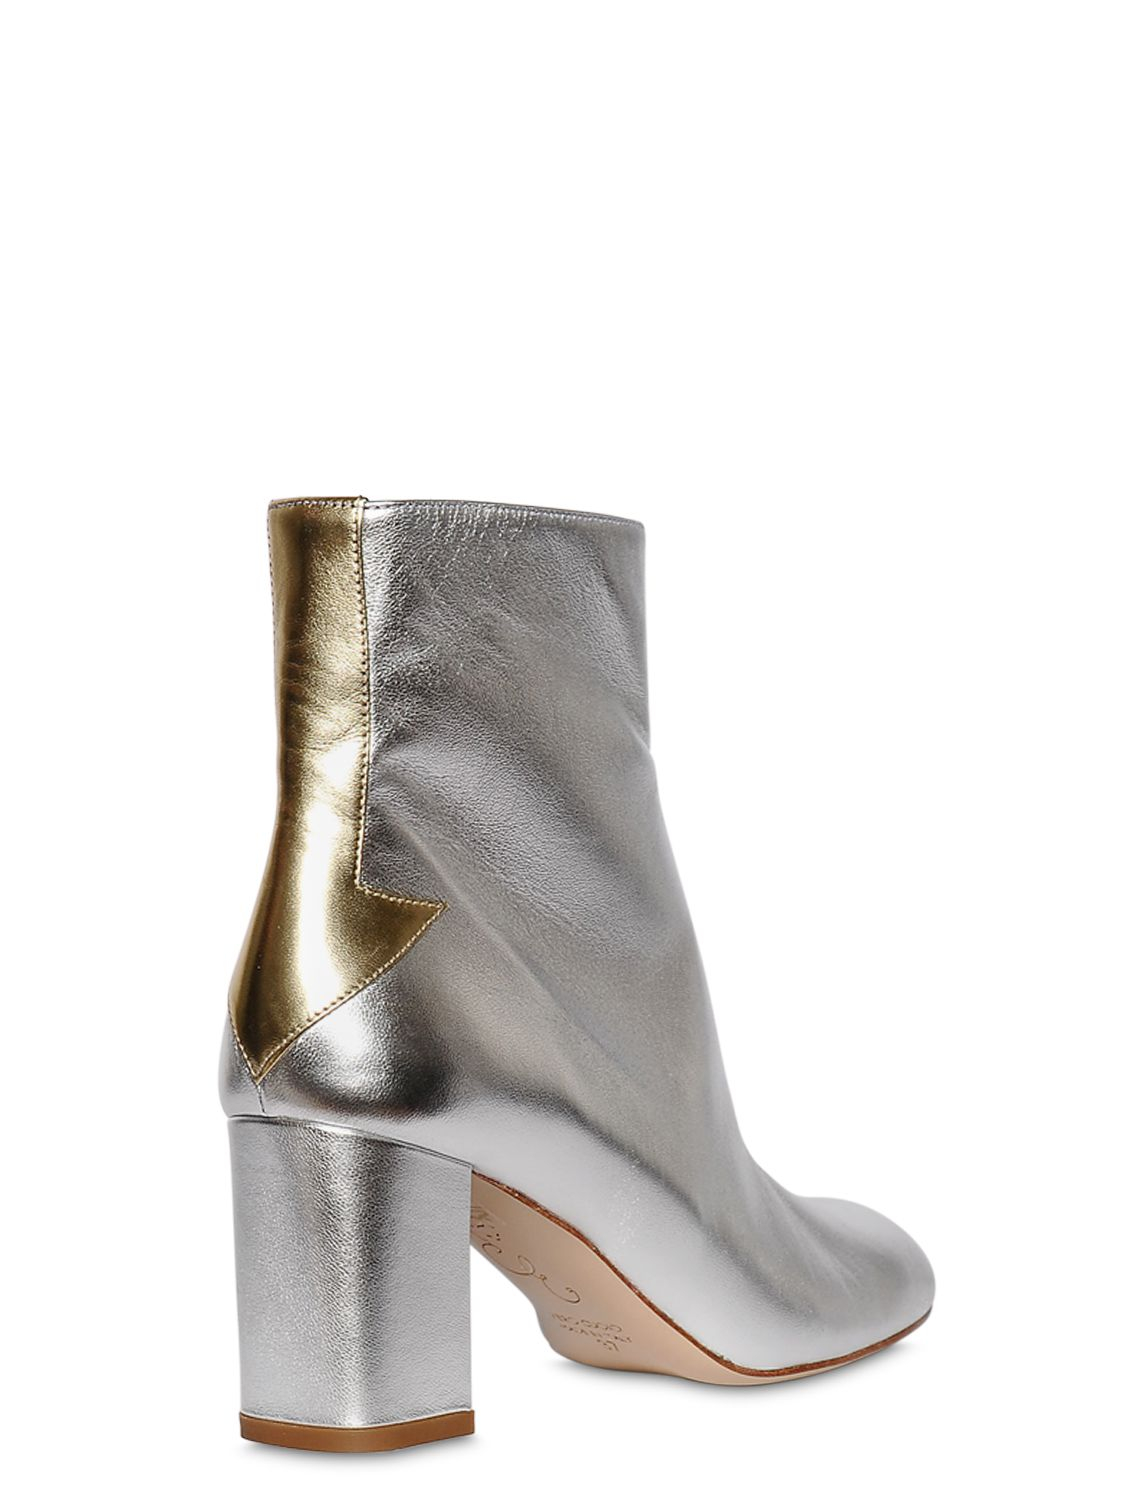 Camilla Elphick 75mm Silver Lining Leather Boots in Metallic | Lyst UK